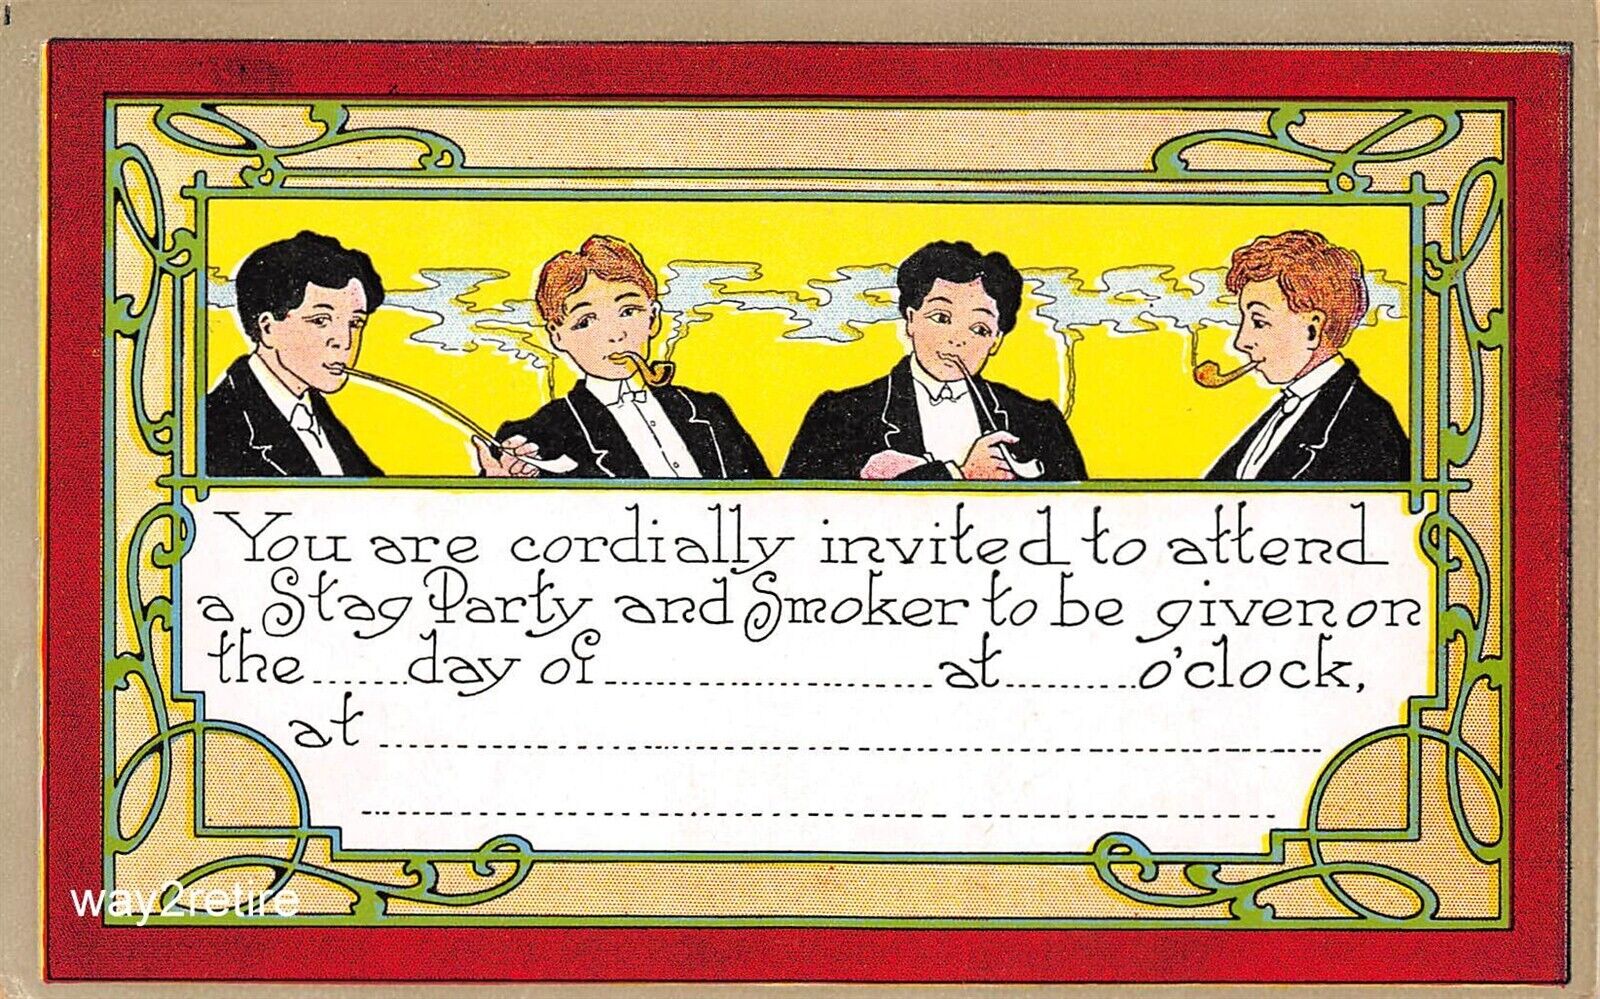 Postcard OCP Invitation Cordially Invited to Stag Party and Smoker 1920s